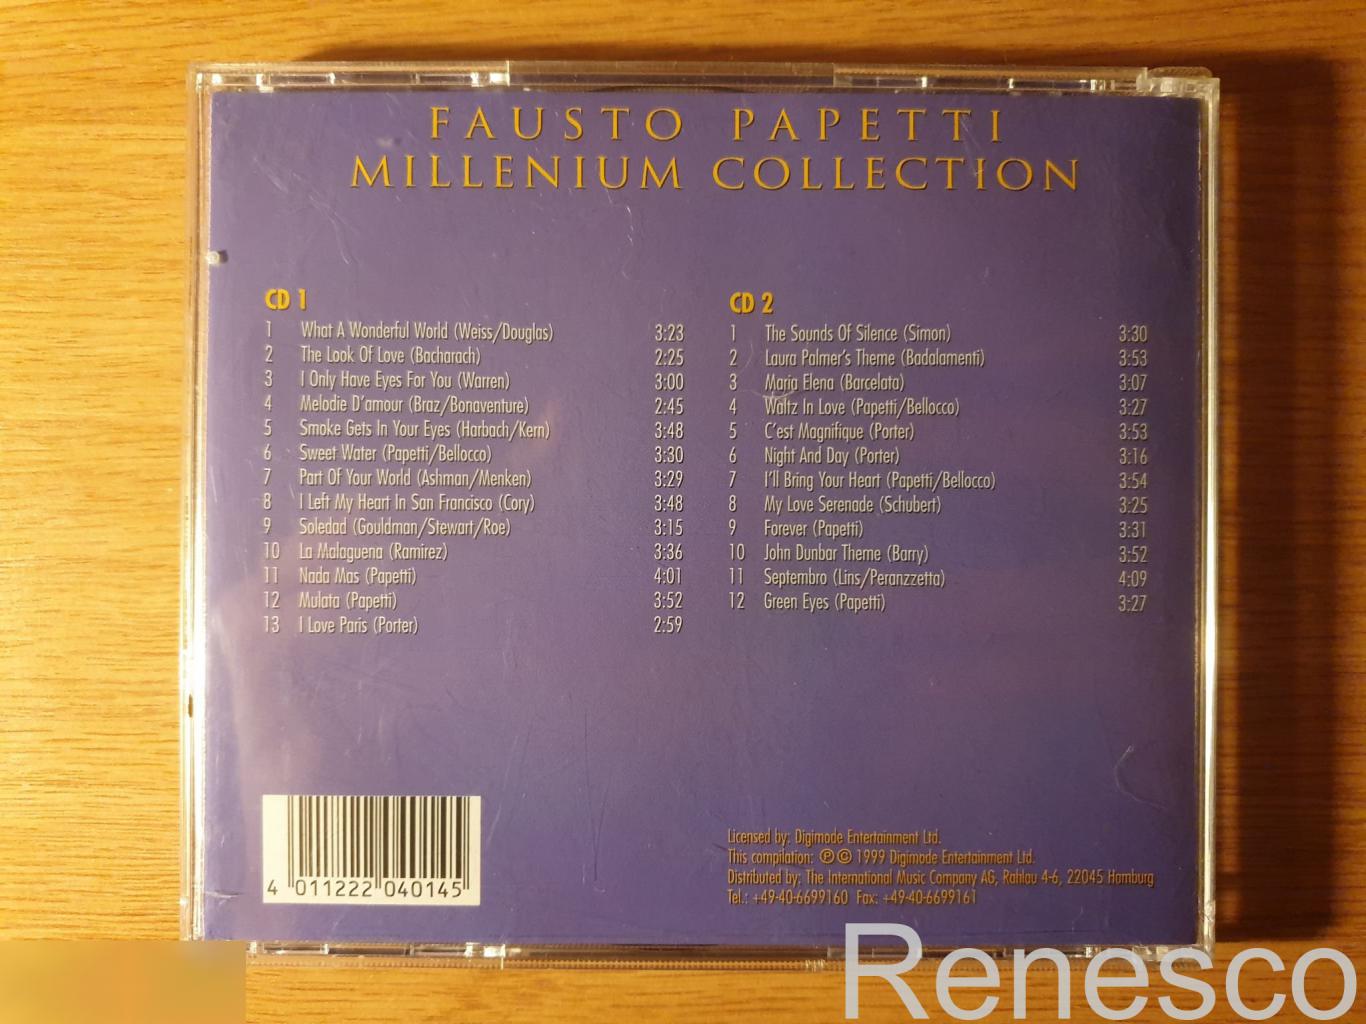 (2CD) Fausto Papetti - Millenium Collection (1999) (Germany) 1